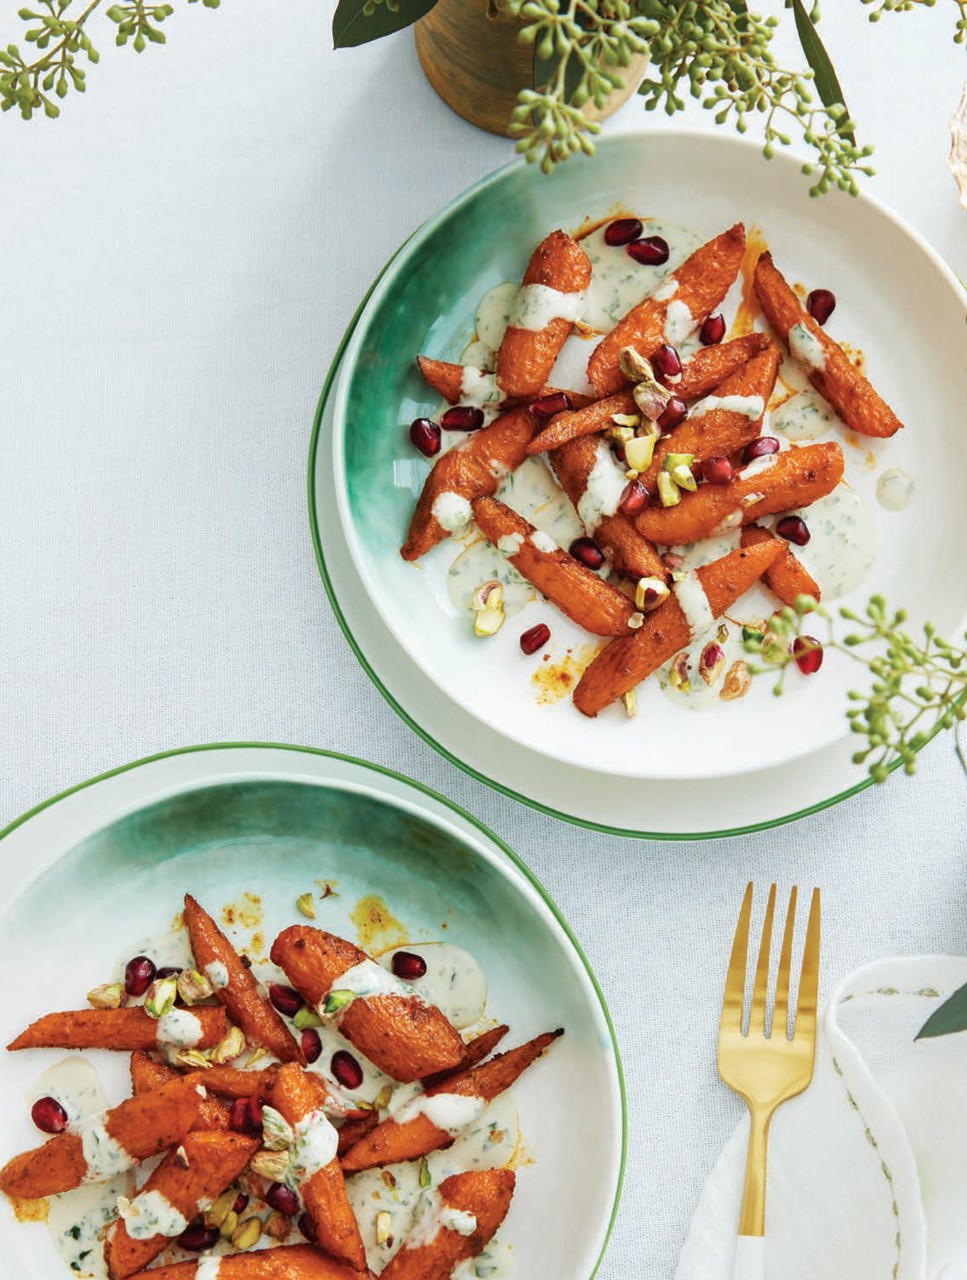 Roasted Carrot Salad with Herbed Tahini, Pomegranate Seeds & Pistachios